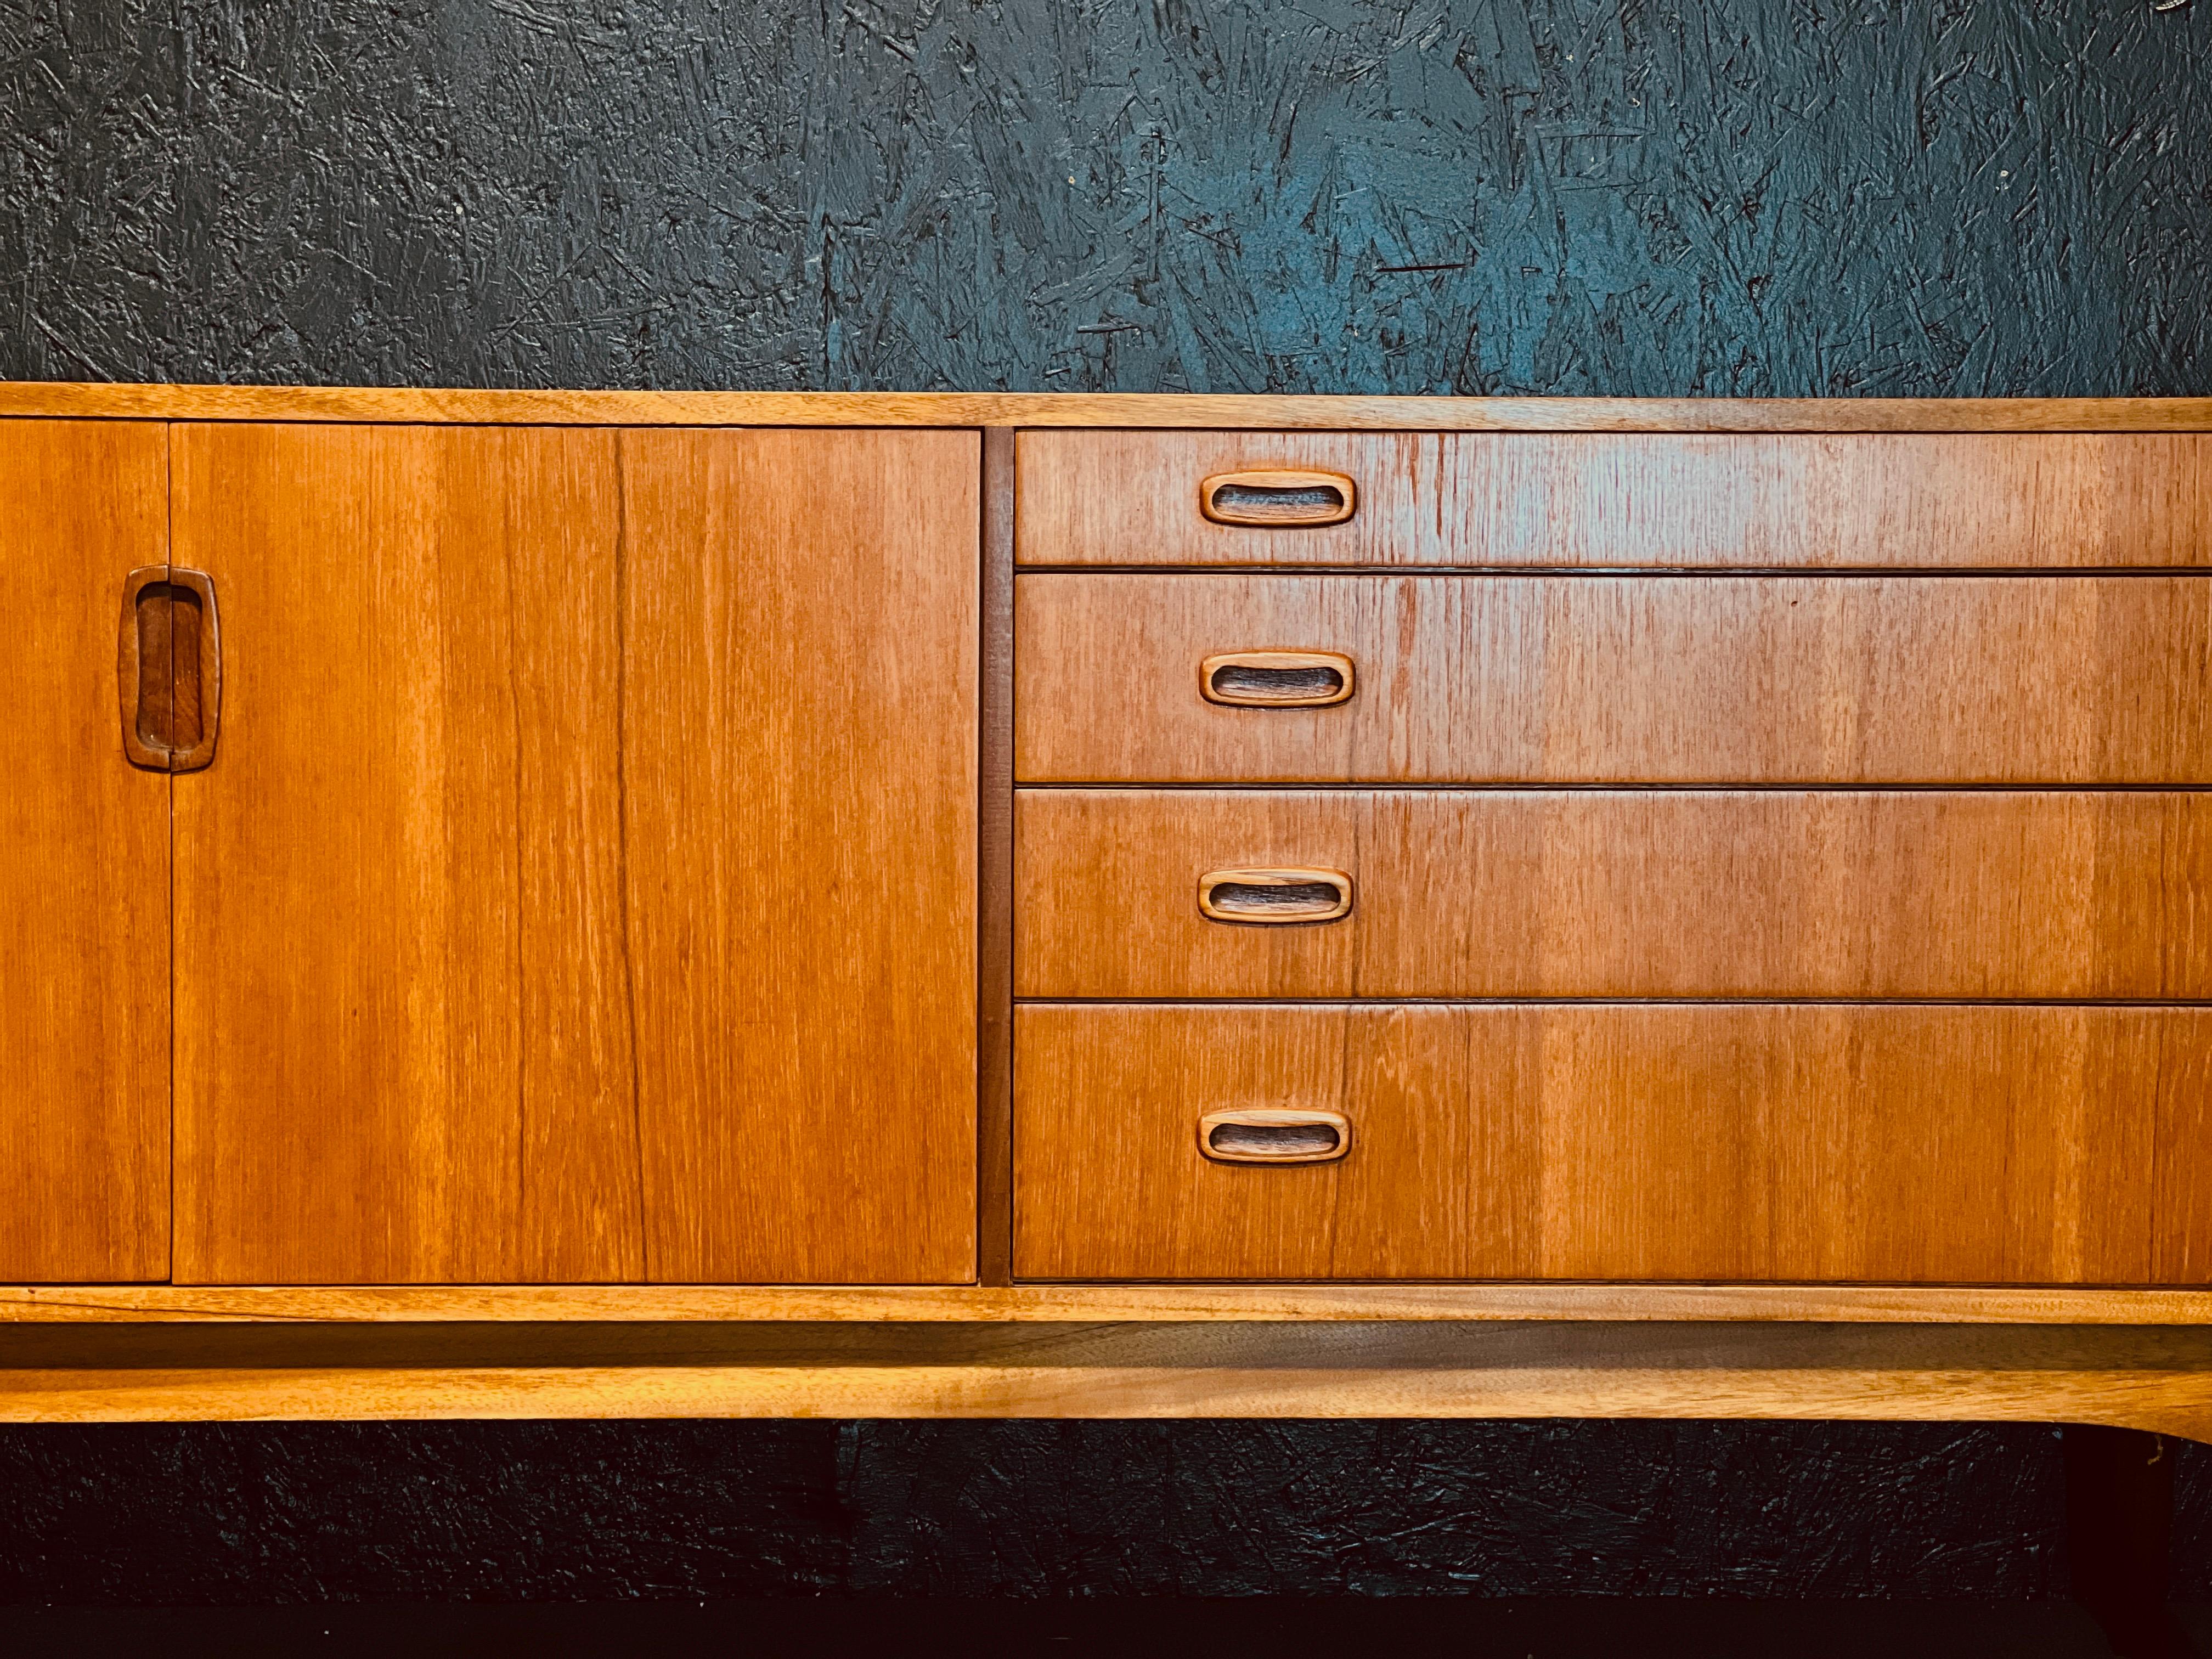 Mid-Century sideboard from the English brand Greaves & Thomas built-in teak in the 60s.

Greaves & Thomas was a London-based furniture maker based in Clapton, in the London Borough of Hackney, from 1911 till 1965.

The sideboard features a